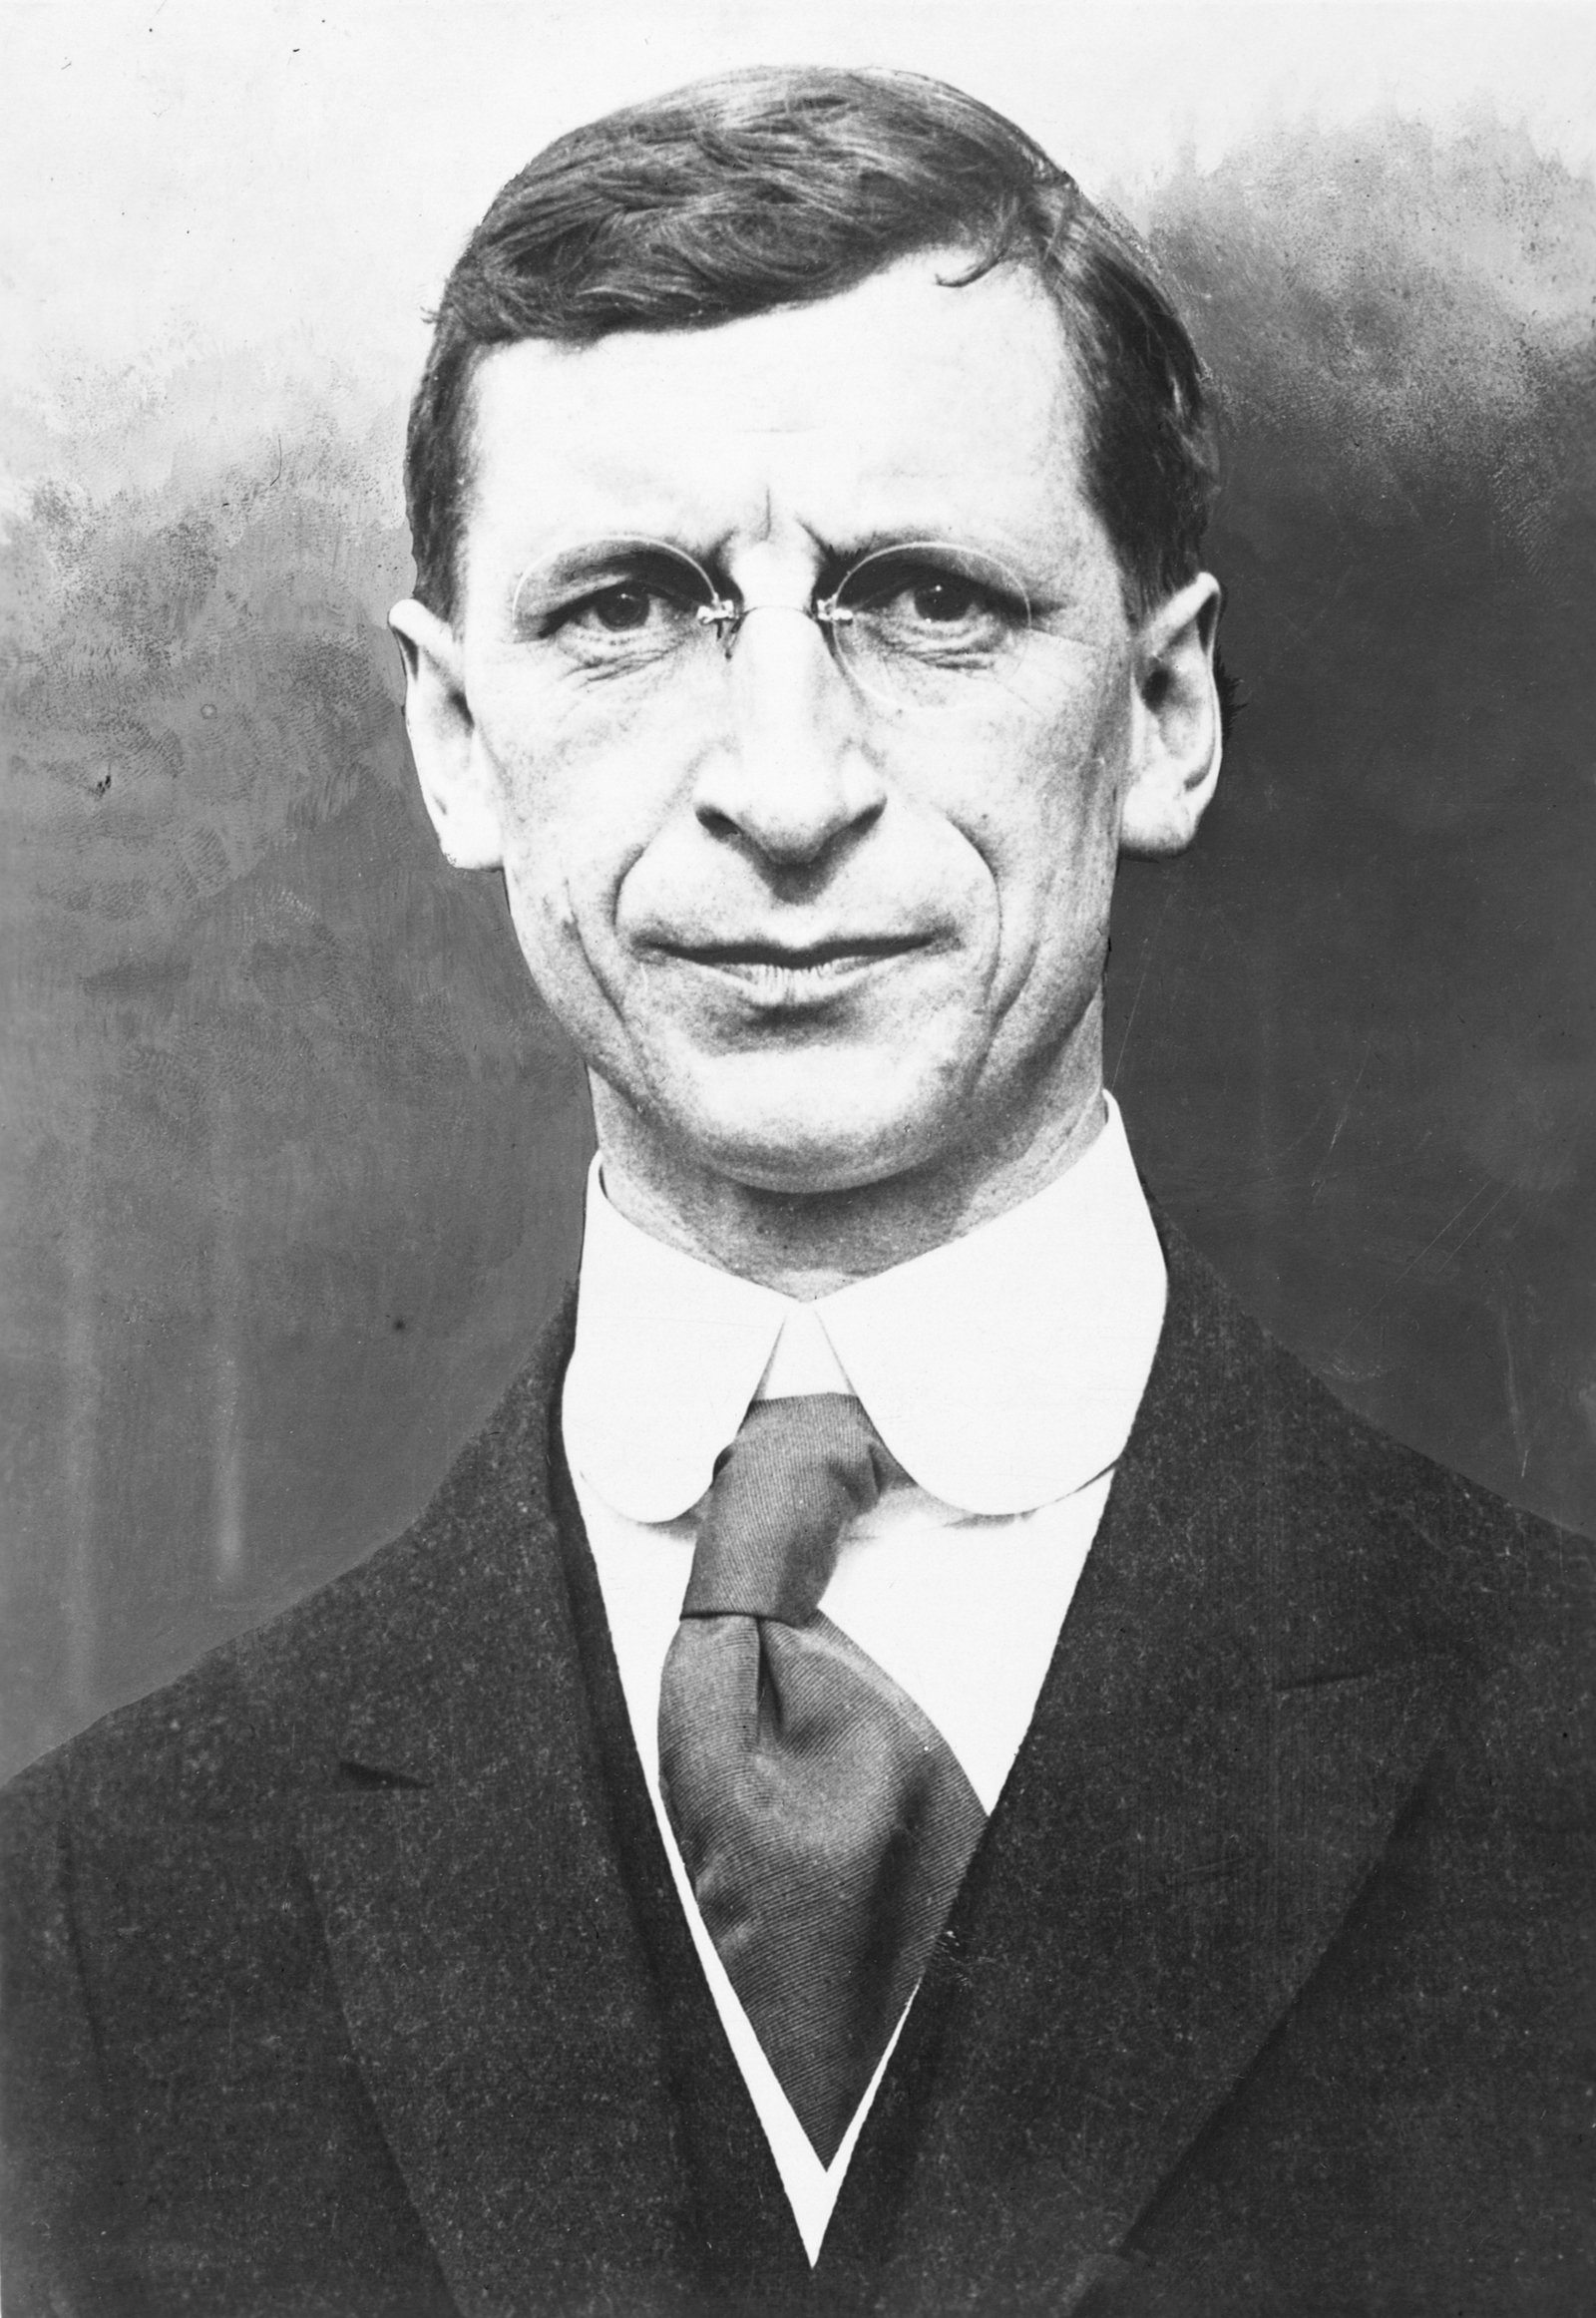 Image - President de Valera: He wanted the last word after the vote, but was overwhelmed by the gravity of the moment. Credit: Getty Images